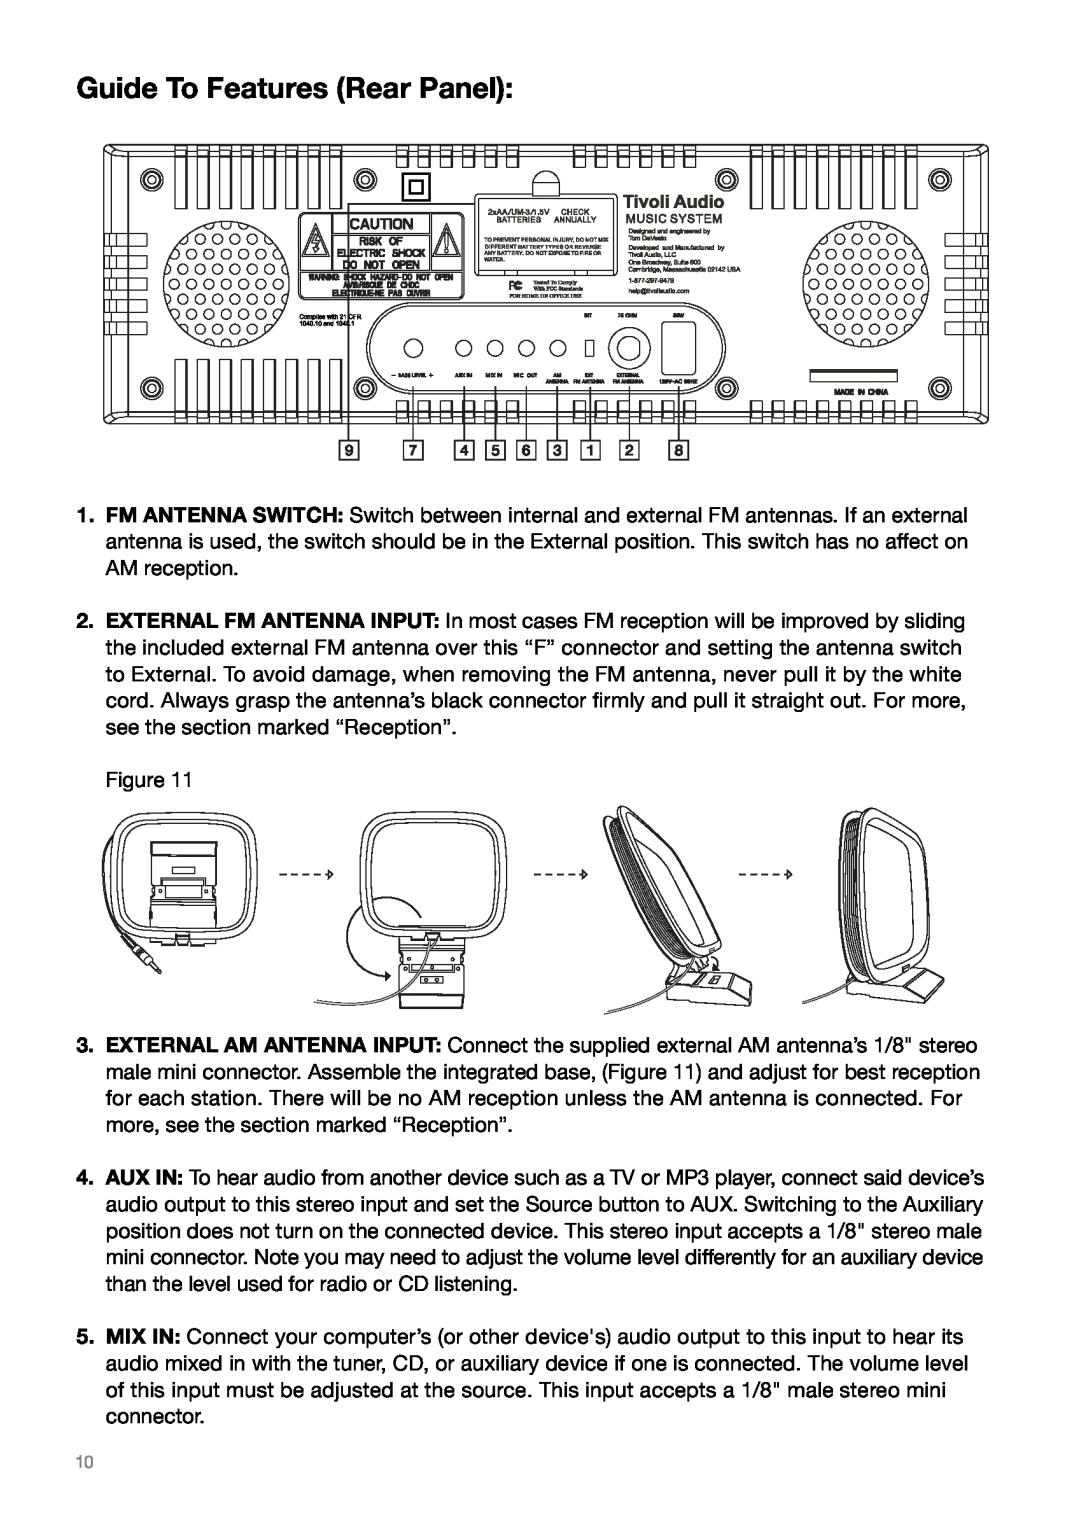 Tivoli Audio MSY0906USR2 owner manual Guide To Features Rear Panel 